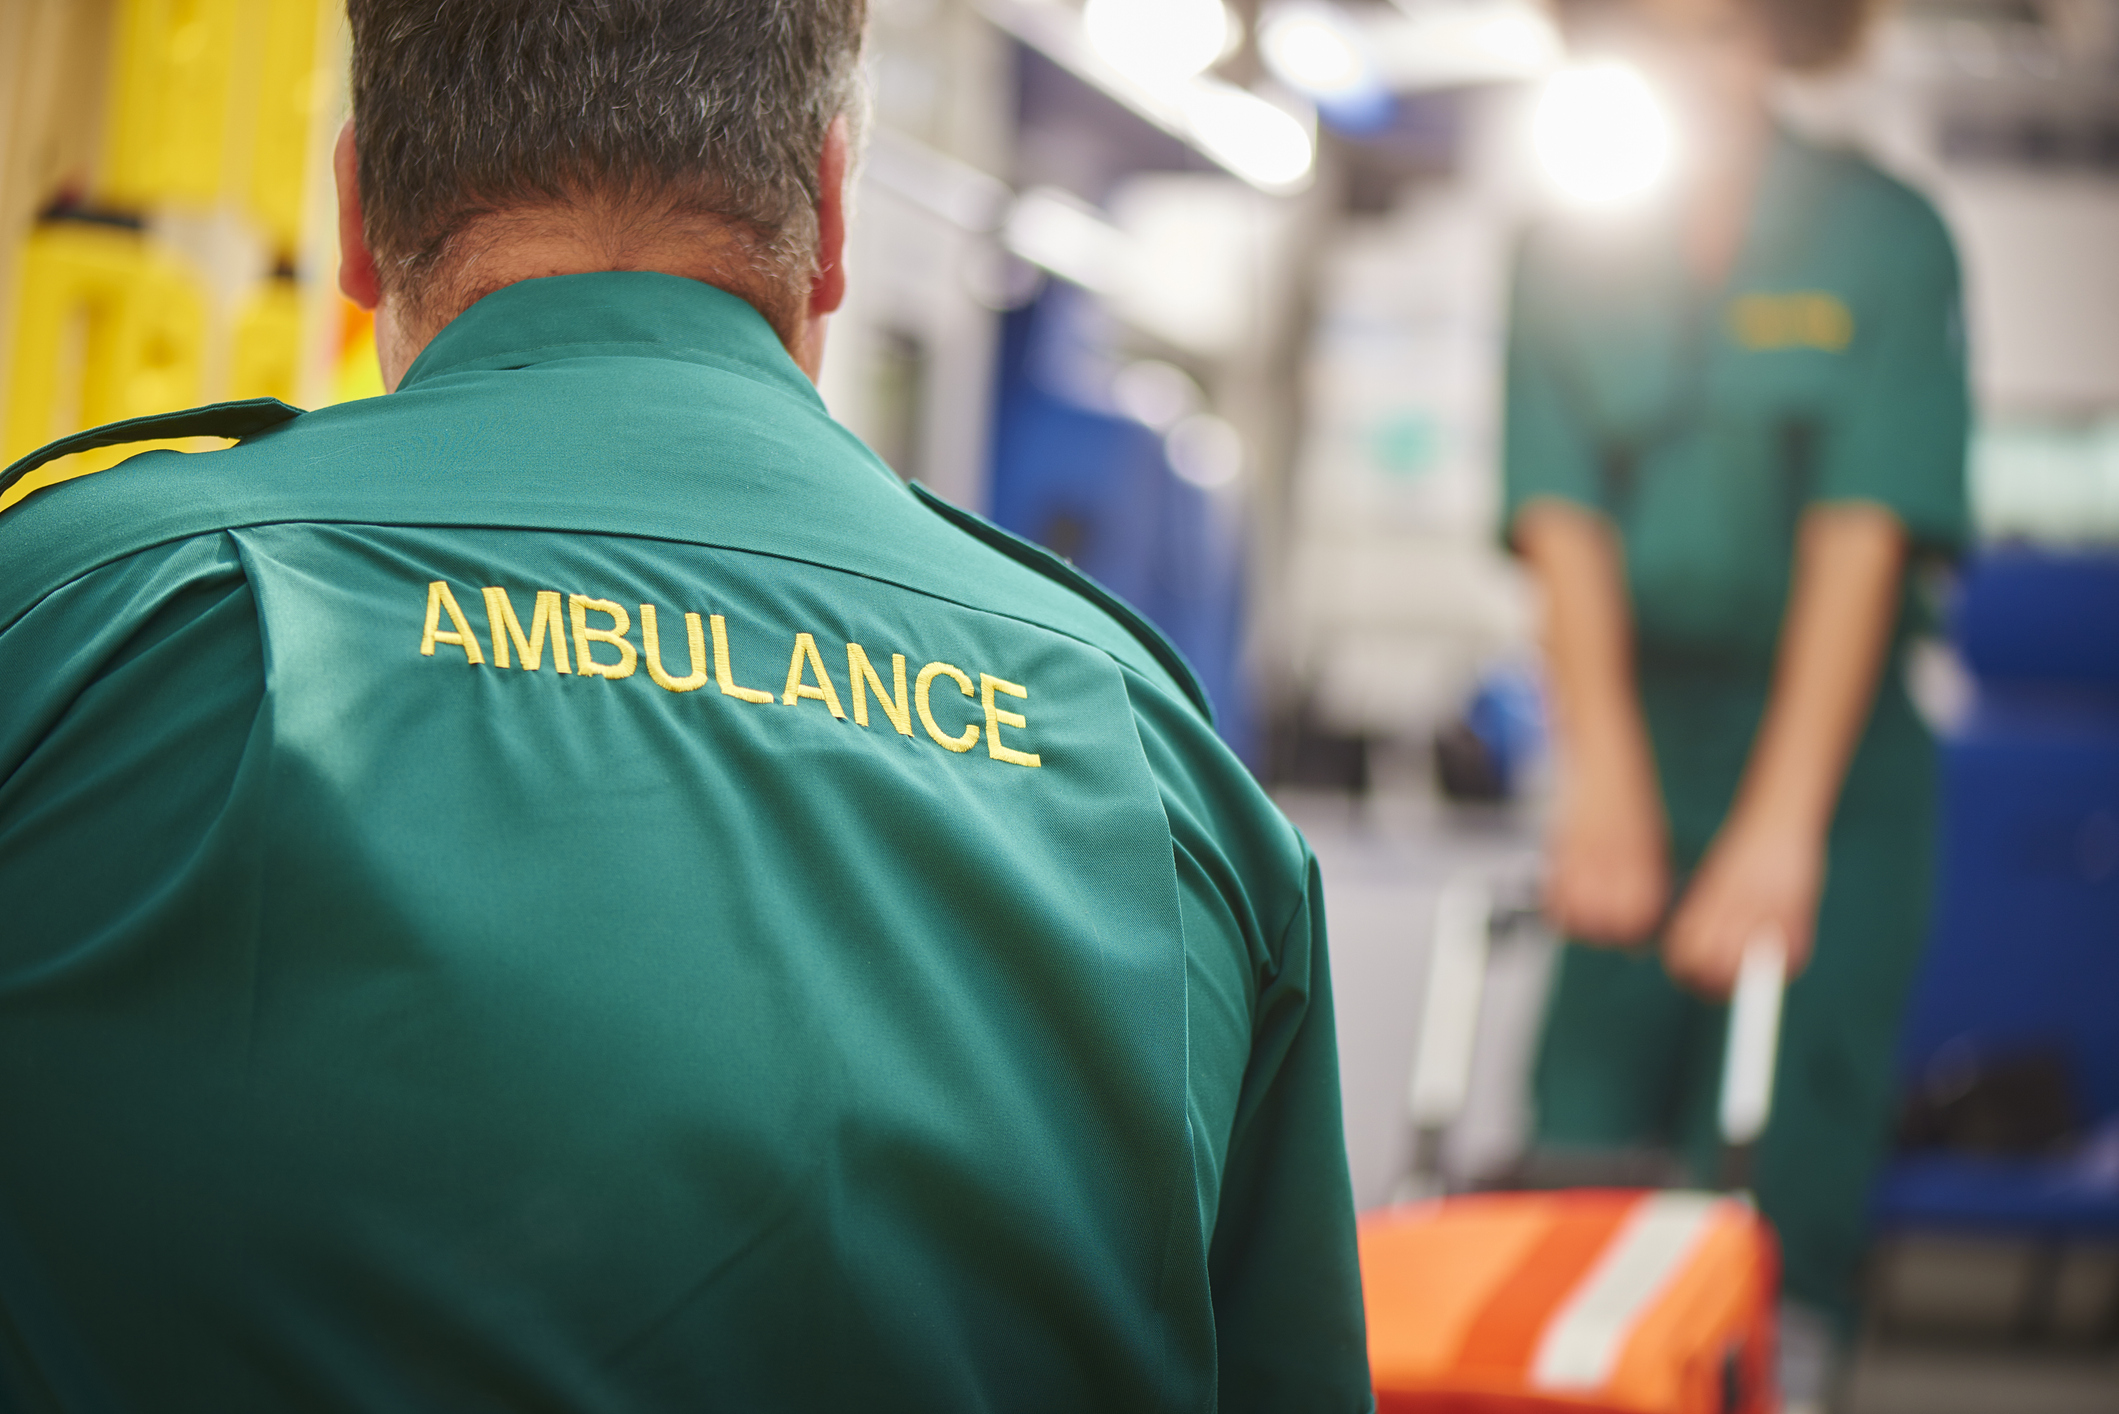 Two uk ambulance staff members pull a stretcher on or off of their ambulance . We are looking over the shoulder of the male paramedic focussing on the word ambulance on his back.They are wearing a green ambulance uniform typical of uk paramedics. The female paramedic and the back of the ambulance are defocussed.